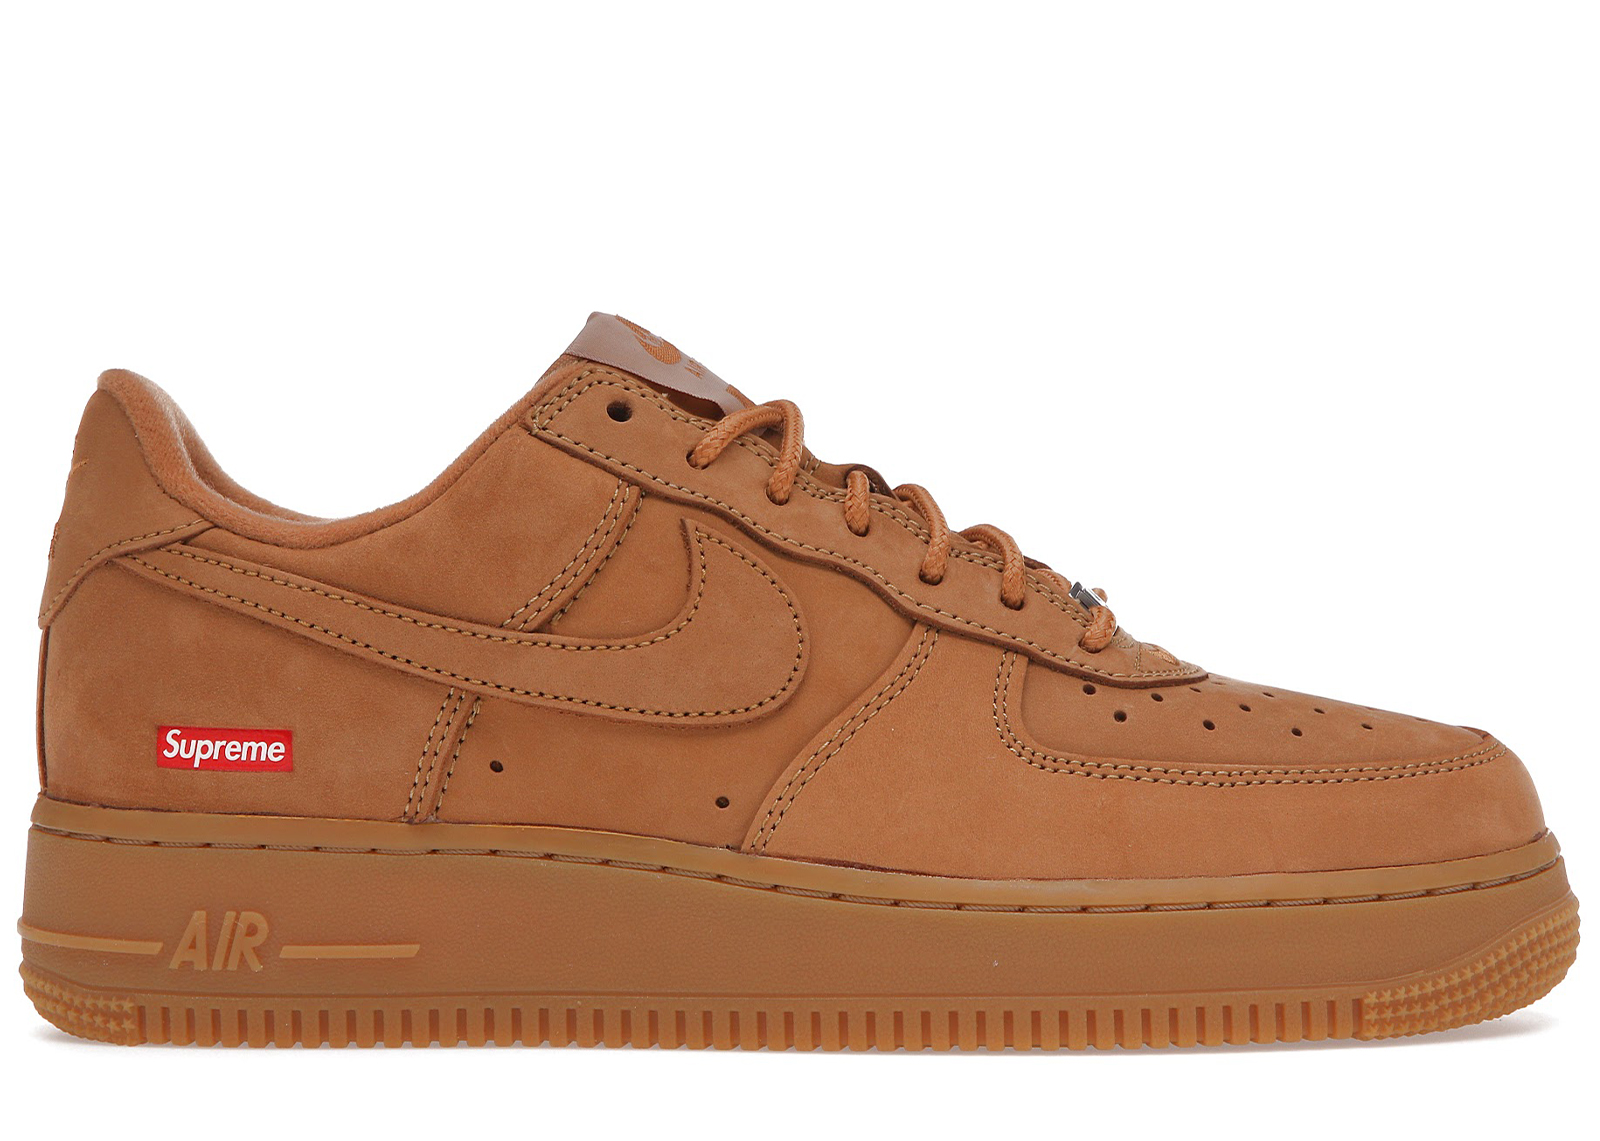 Nike Air Force 1 Low SP Supreme Wheat - DN1555-200